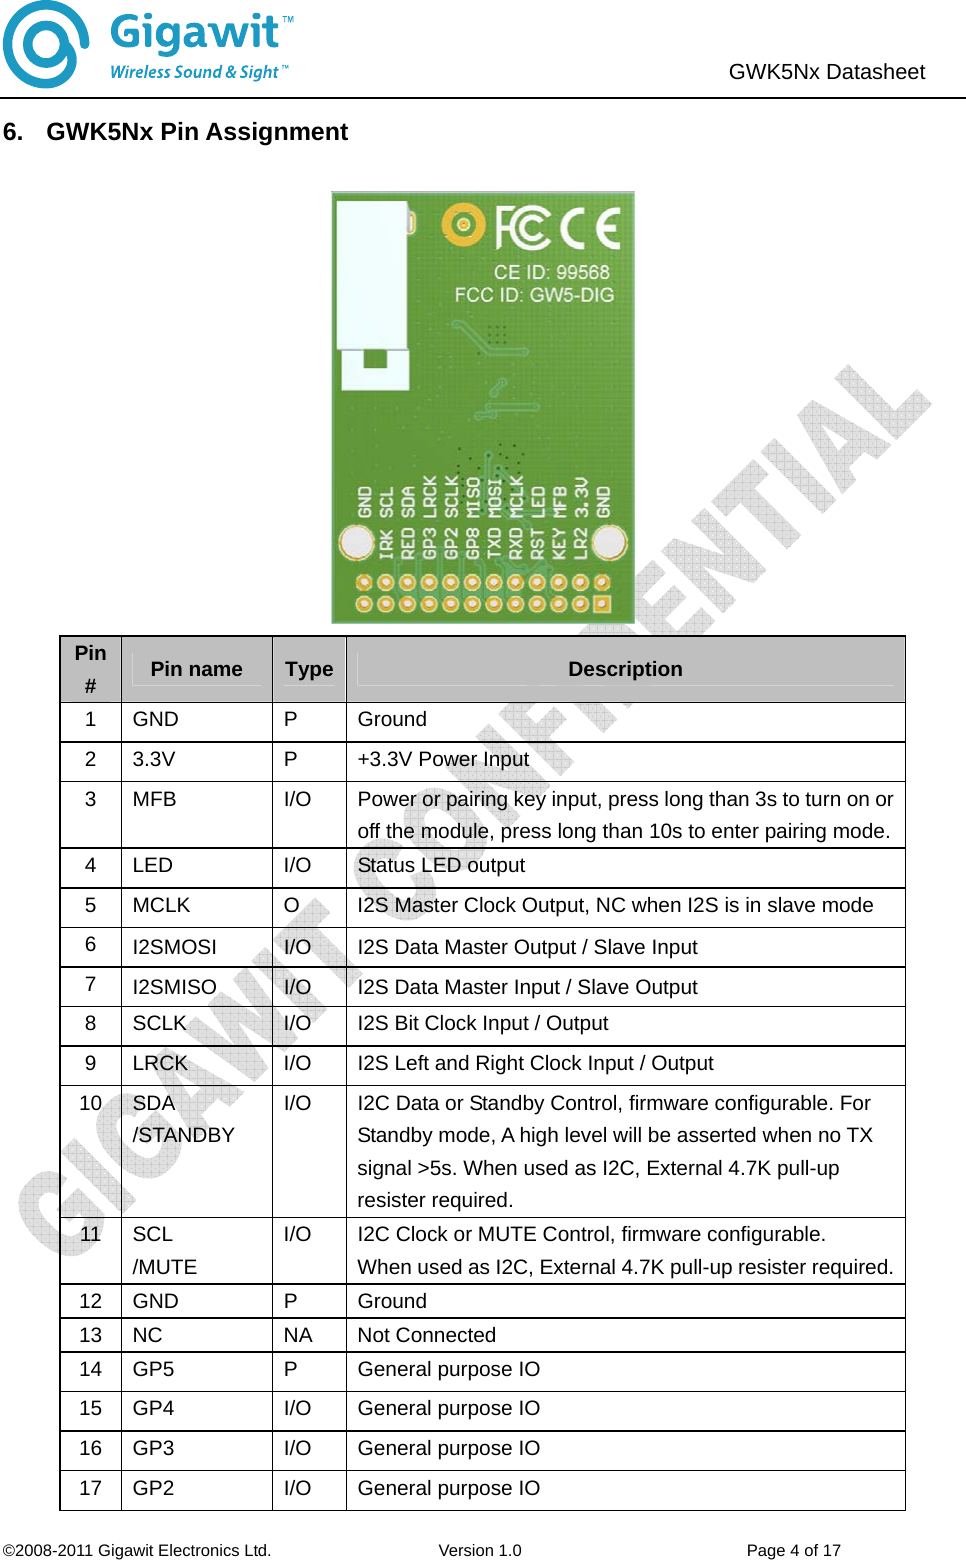                               ©2008-2011 Gigawit Electronics Ltd.                    Version 1.0                           Page 4 of 17  GWK5Nx Datasheet   6. GWK5Nx Pin Assignment    Pin #   Pin name Type Description 1 GND  P  Ground 2 3.3V  P  +3.3V Power Input 3  MFB  I/O  Power or pairing key input, press long than 3s to turn on or off the module, press long than 10s to enter pairing mode.4  LED  I/O  Status LED output 5  MCLK  O  I2S Master Clock Output, NC when I2S is in slave mode   6  I2SMOSI  I/O  I2S Data Master Output / Slave Input 7  I2SMISO  I/O  I2S Data Master Input / Slave Output 8  SCLK  I/O  I2S Bit Clock Input / Output 9  LRCK  I/O  I2S Left and Right Clock Input / Output 10 SDA /STANDBY I/O  I2C Data or Standby Control, firmware configurable. For Standby mode, A high level will be asserted when no TX signal &gt;5s. When used as I2C, External 4.7K pull-up resister required. 11 SCL /MUTE I/O  I2C Clock or MUTE Control, firmware configurable. When used as I2C, External 4.7K pull-up resister required.12 GND  P  Ground 13 NC  NA  Not Connected 14  GP5  P  General purpose IO 15  GP4  I/O  General purpose IO 16  GP3  I/O  General purpose IO 17  GP2  I/O  General purpose IO 